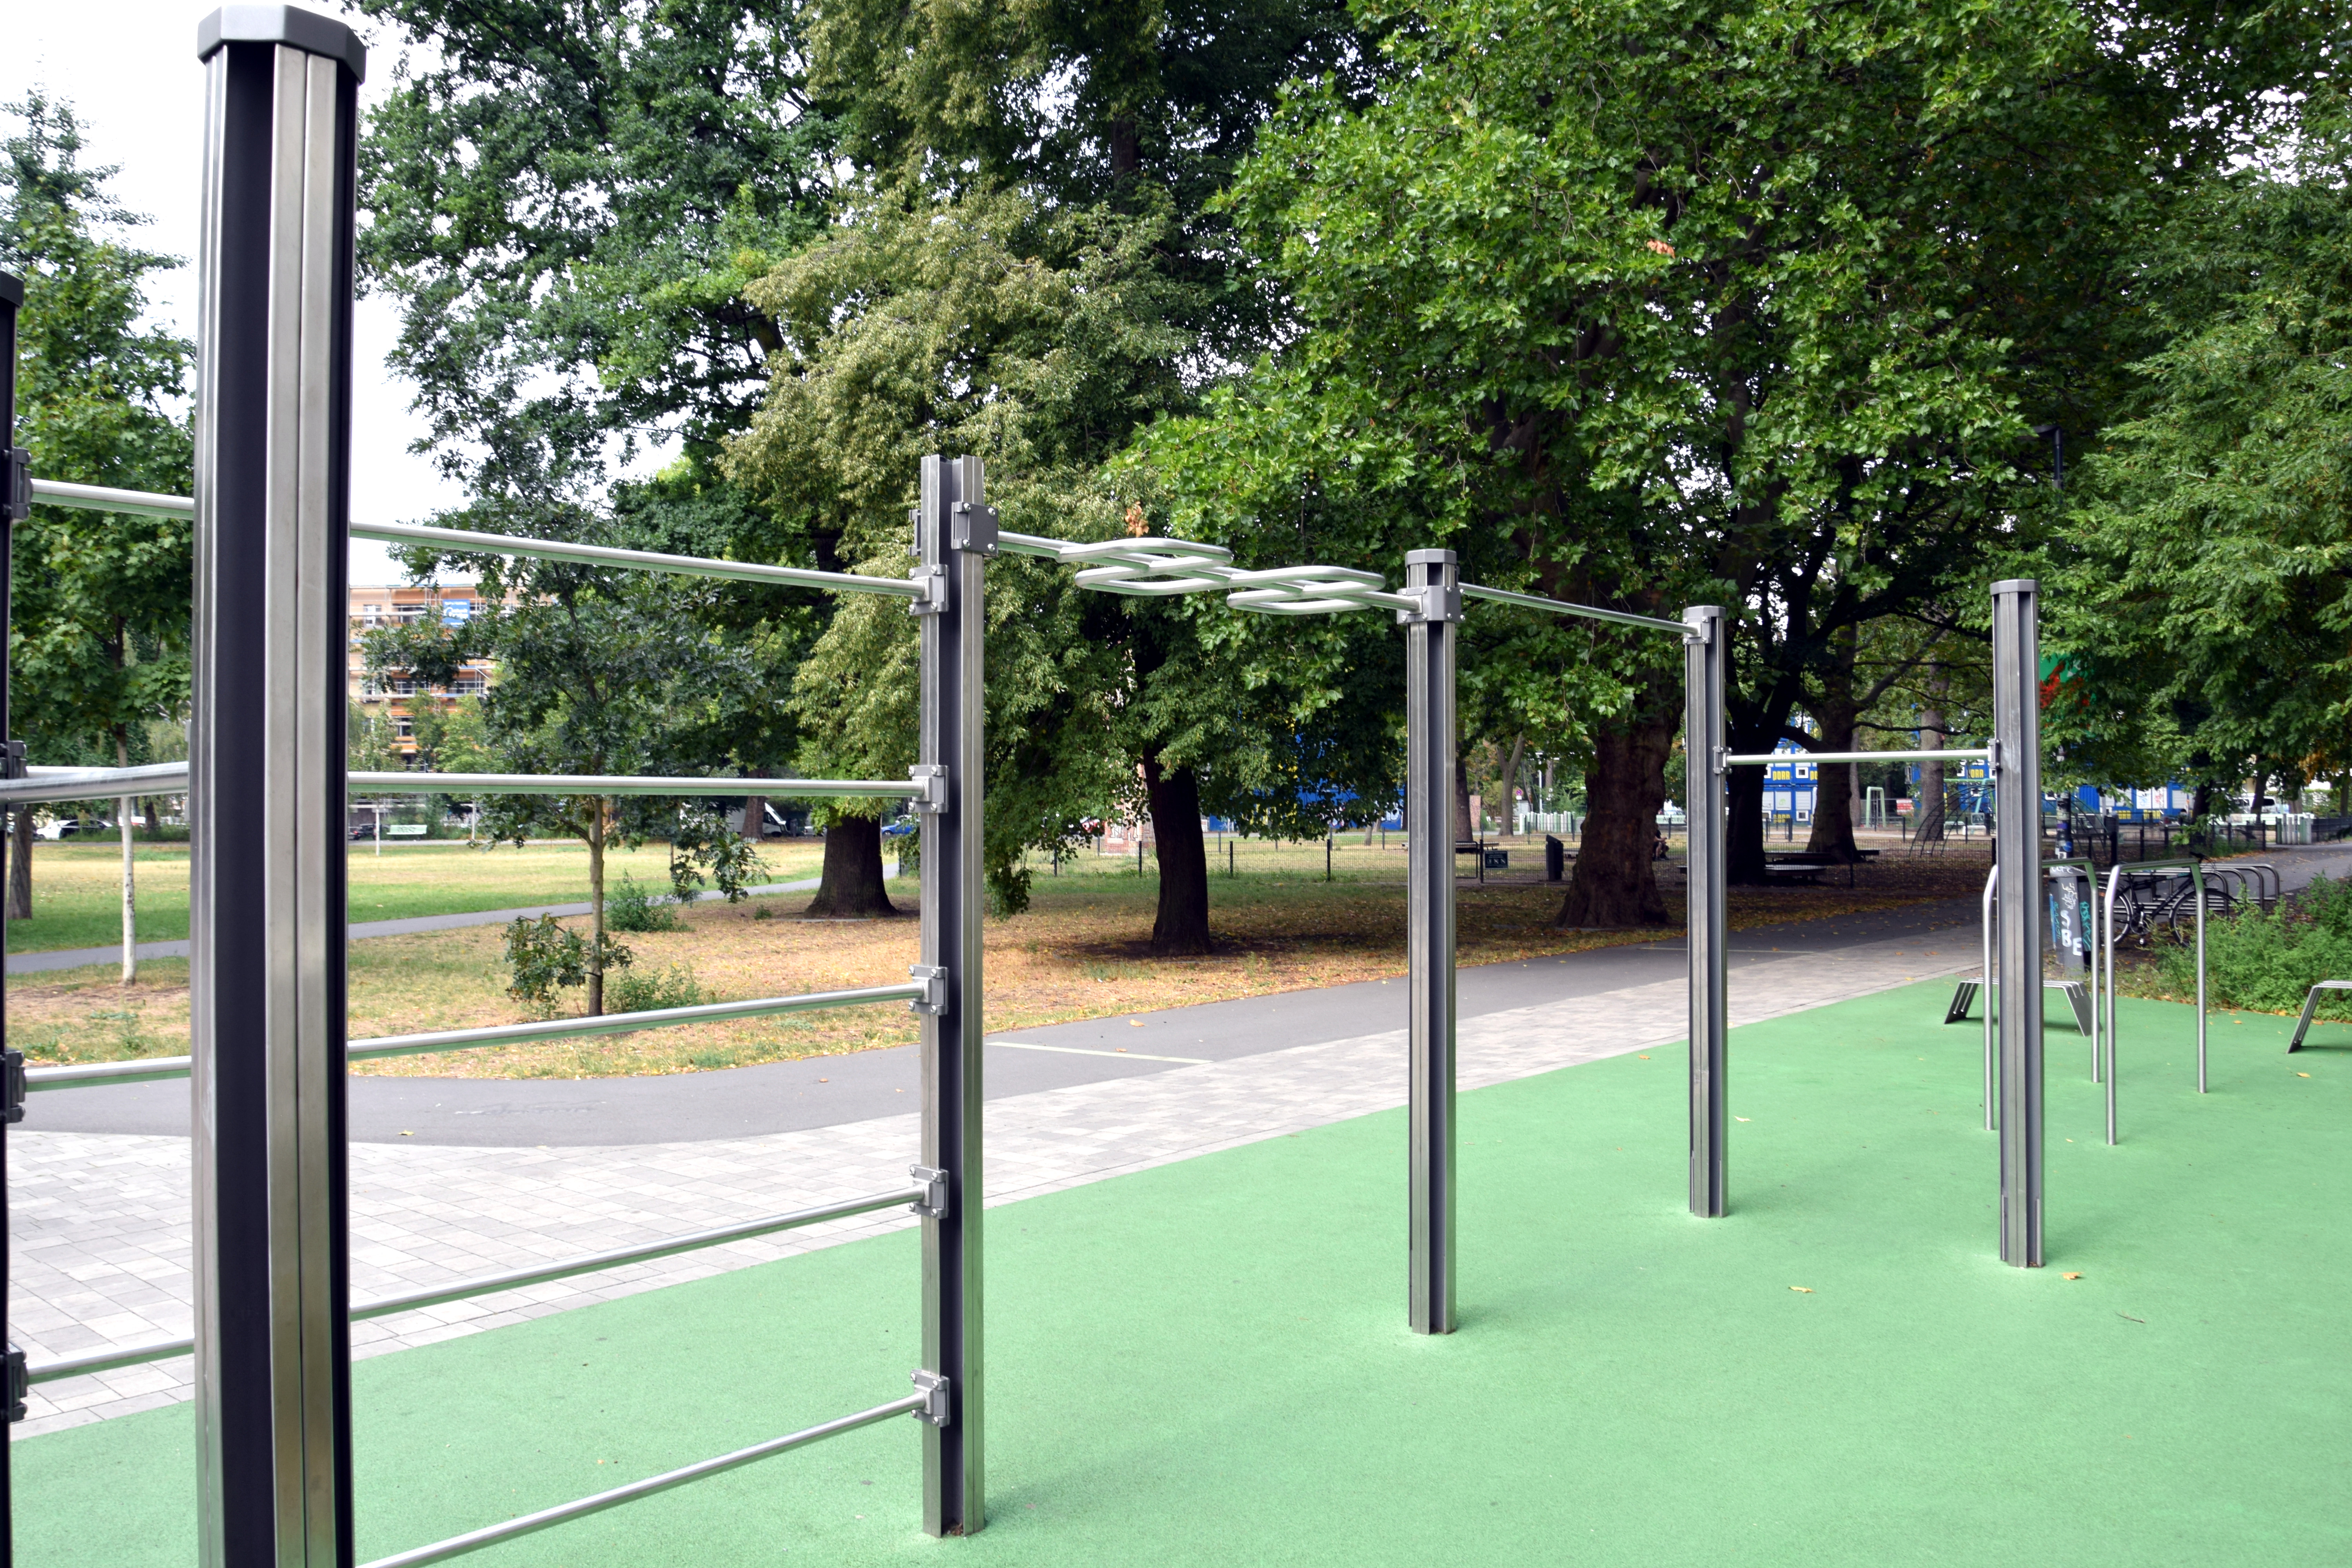 Outdoor gym - Wikipedia